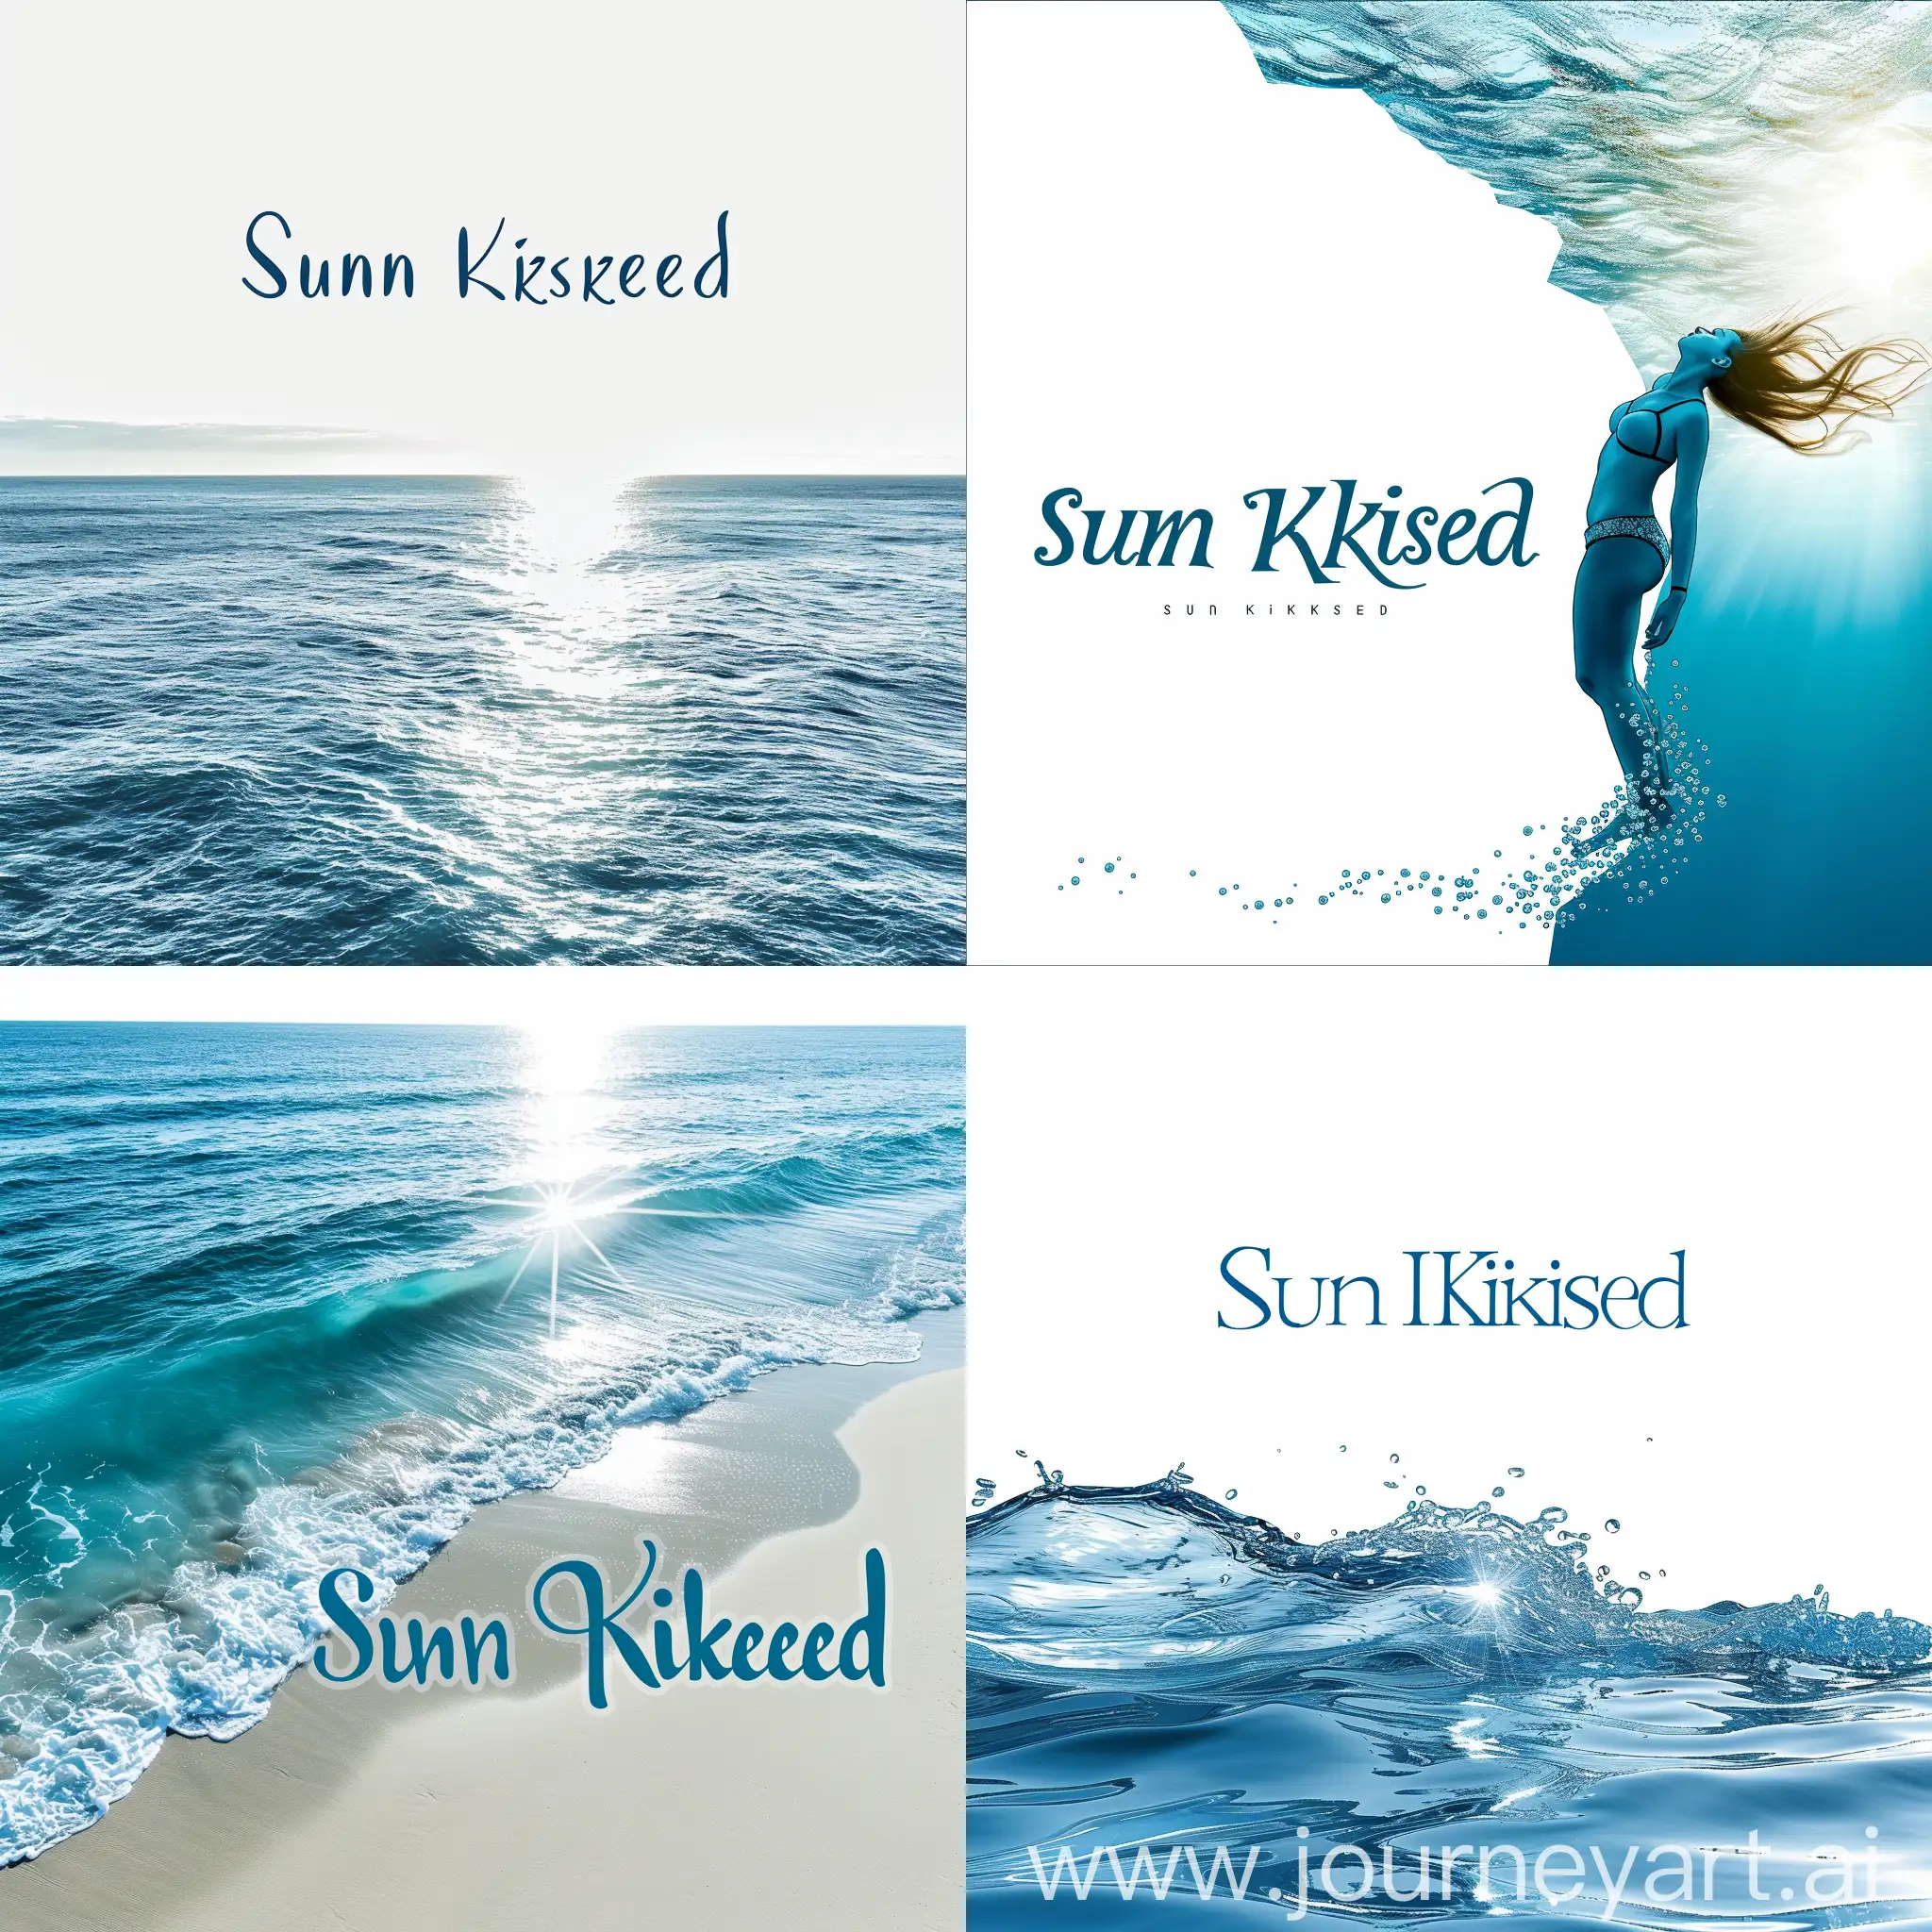 Capture the essence of Sun Kissed, a contemporary jewelry brand that draws inspiration from the majestic ocean. Craft a sleek logo in a captivating shade of blue, elegantly juxtaposed against a pristine white backdrop. Additionally, please incorporate the words "Sun Kissed" in a graceful and enchanting font.